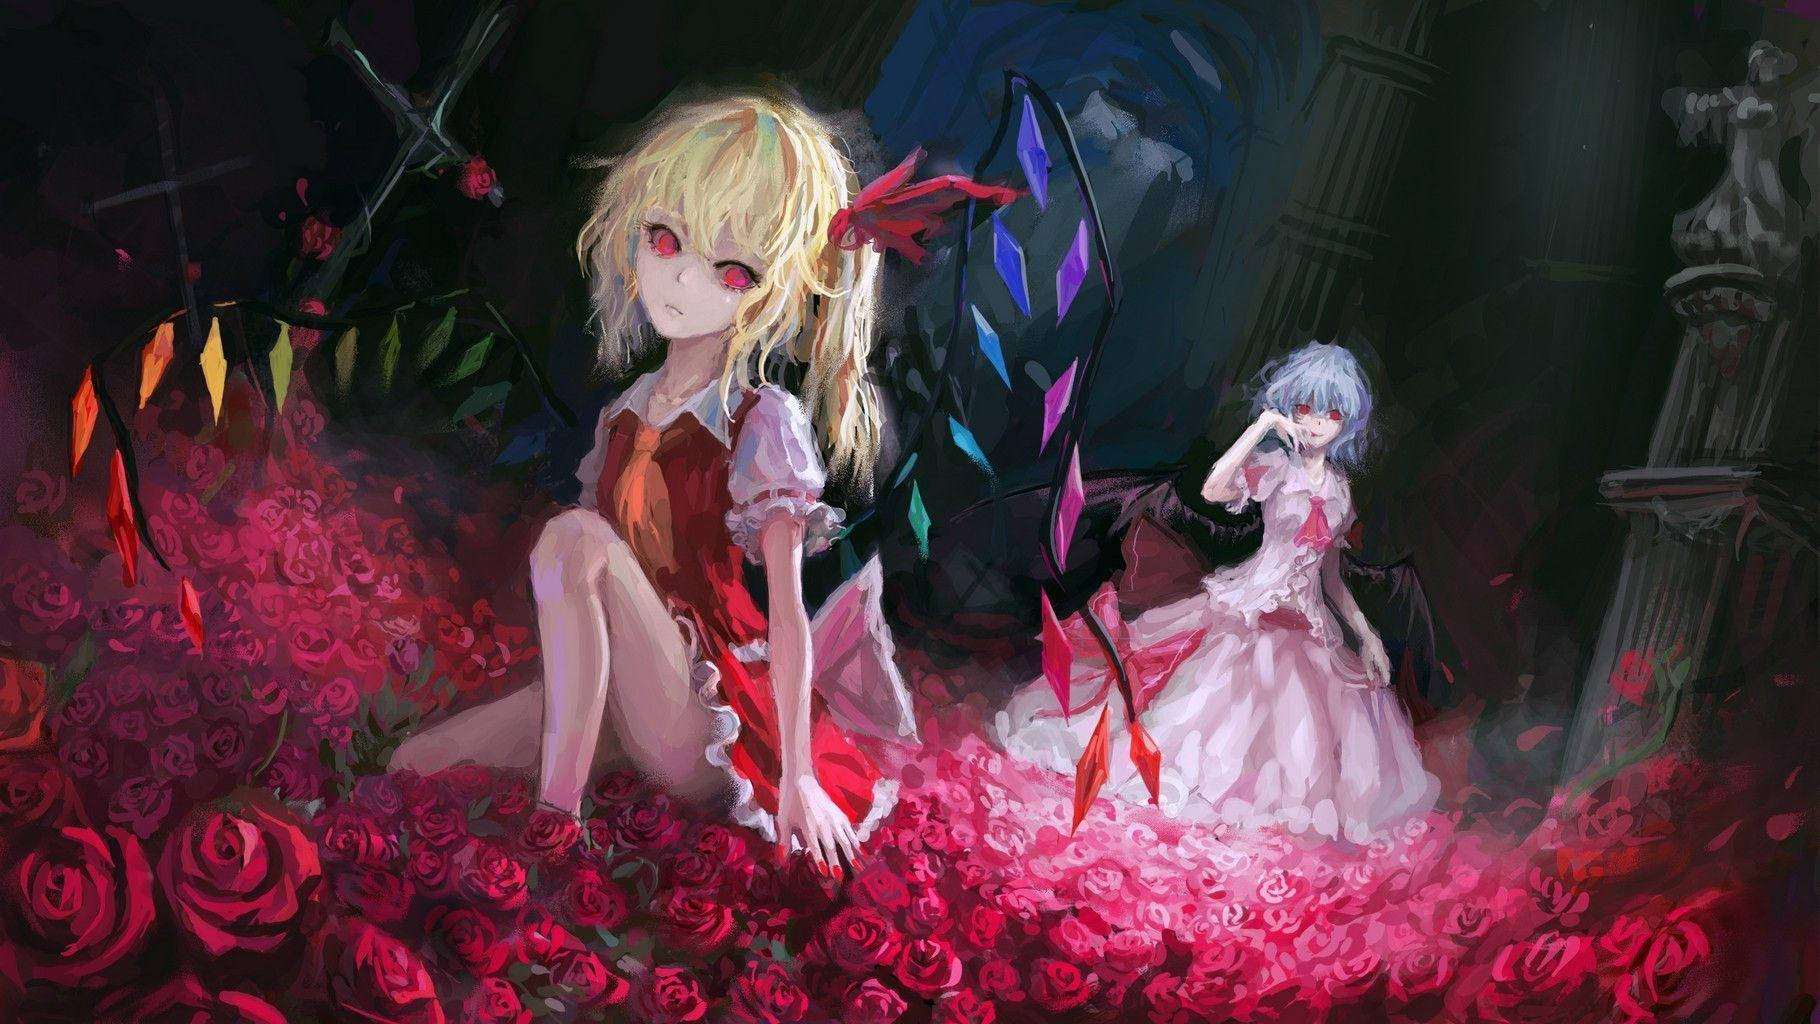 Flandre And Remilia On Roses Background